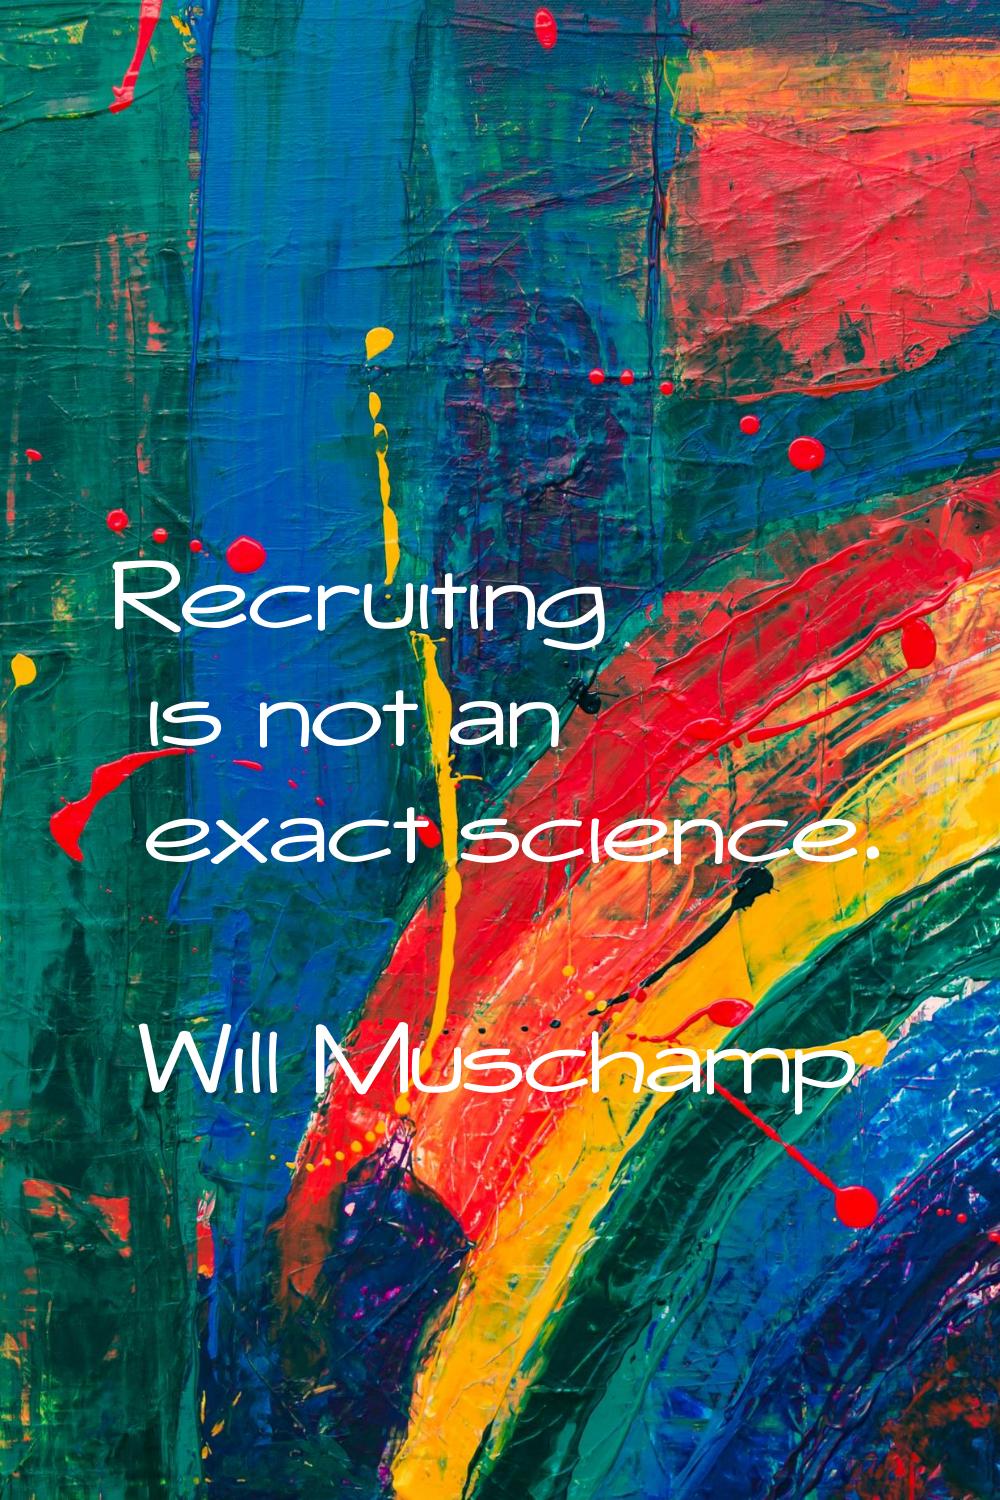 Recruiting is not an exact science.